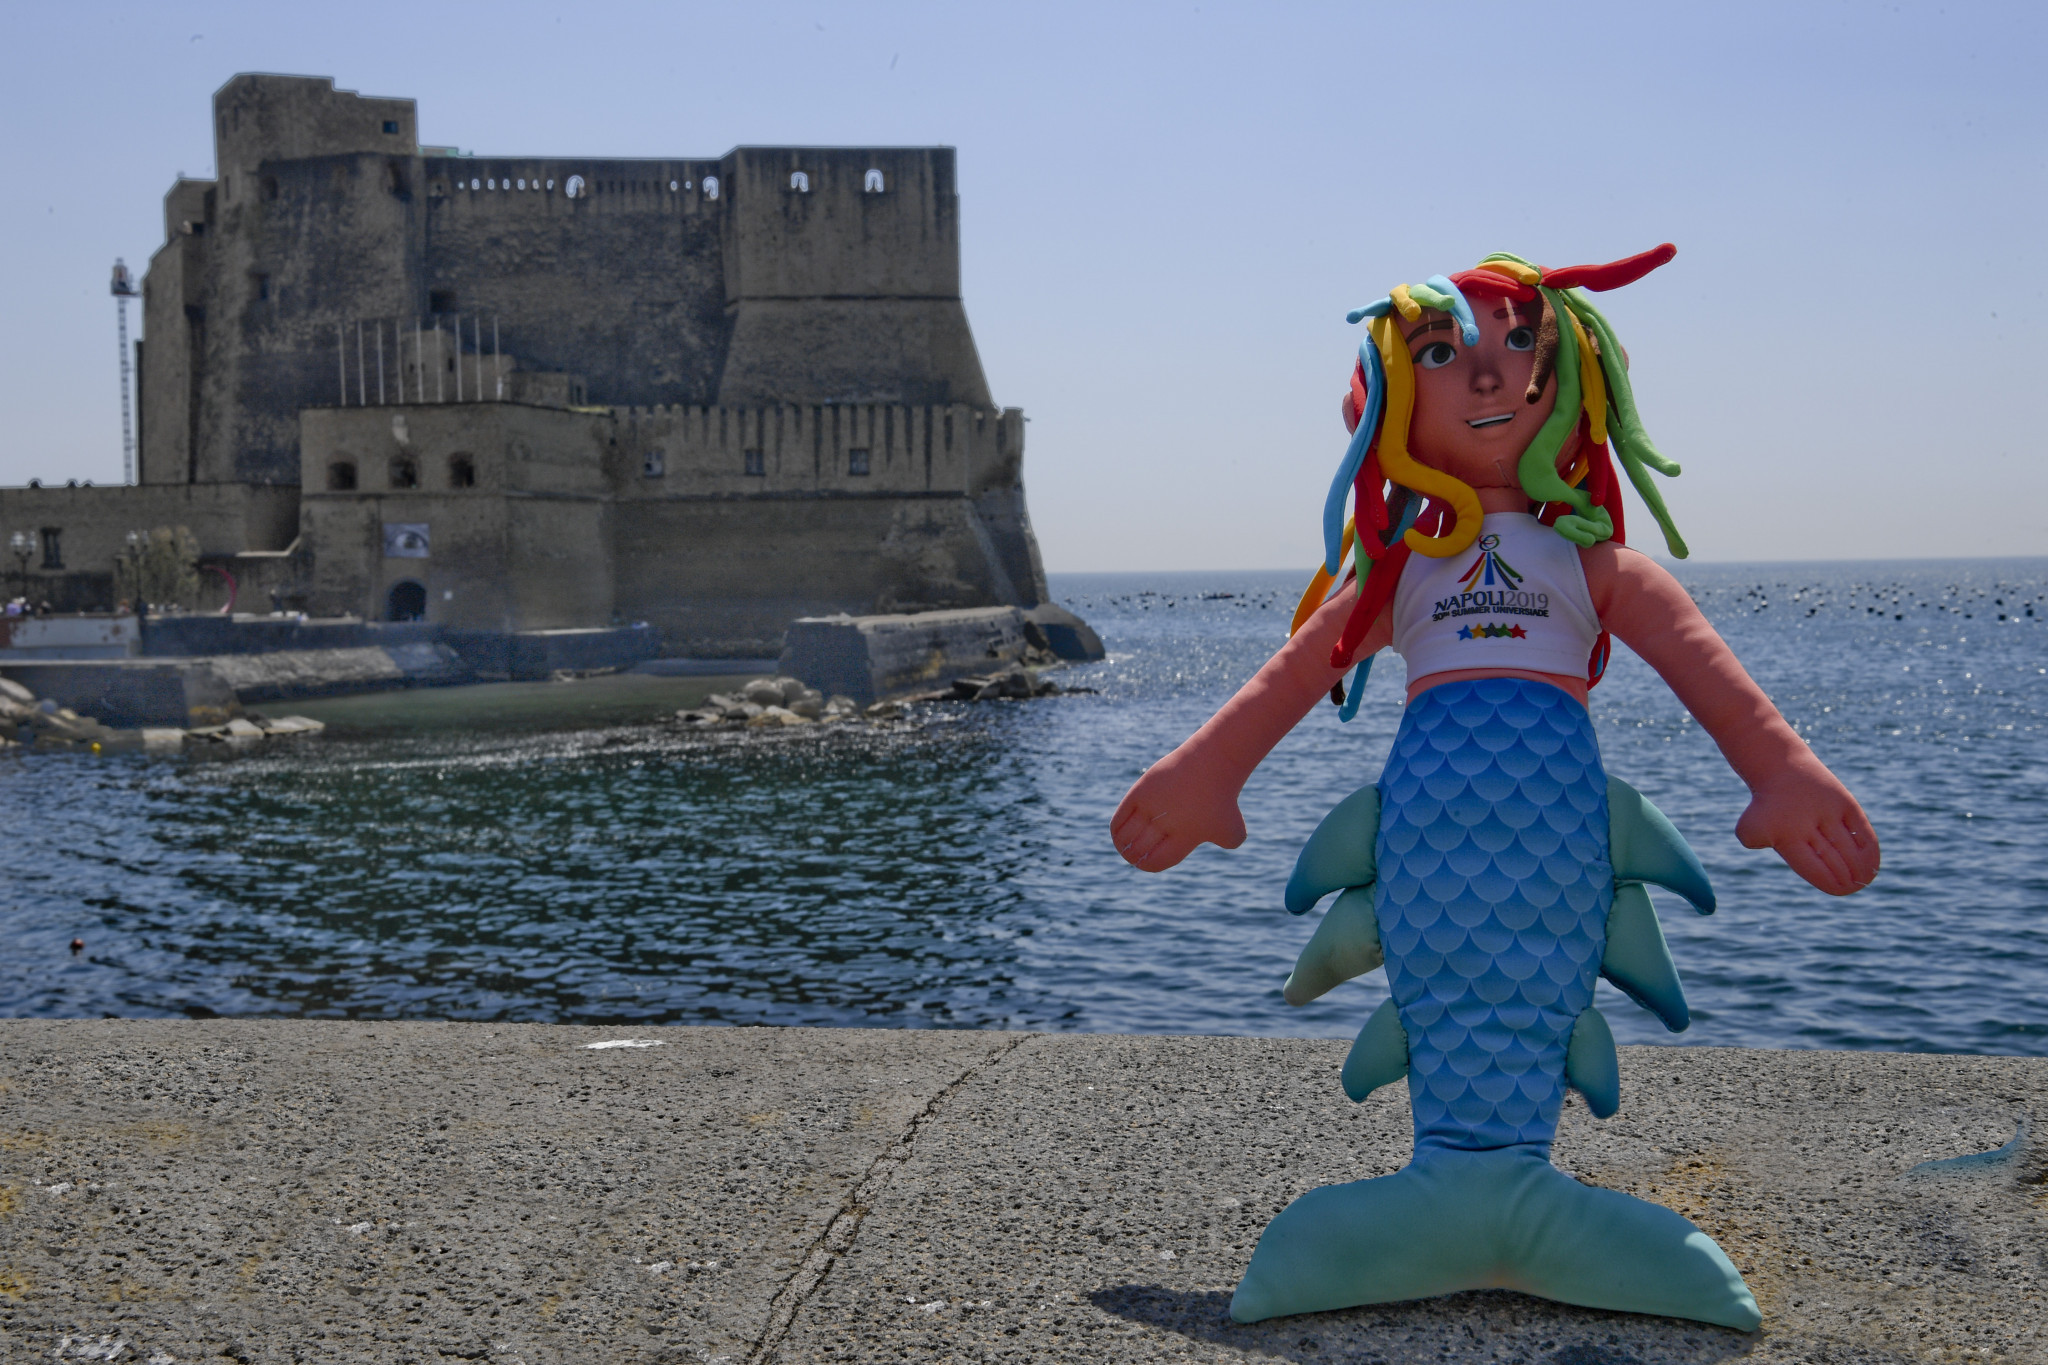 Partenope was the mascot for the 2019 event in Naples ©Naples 2019